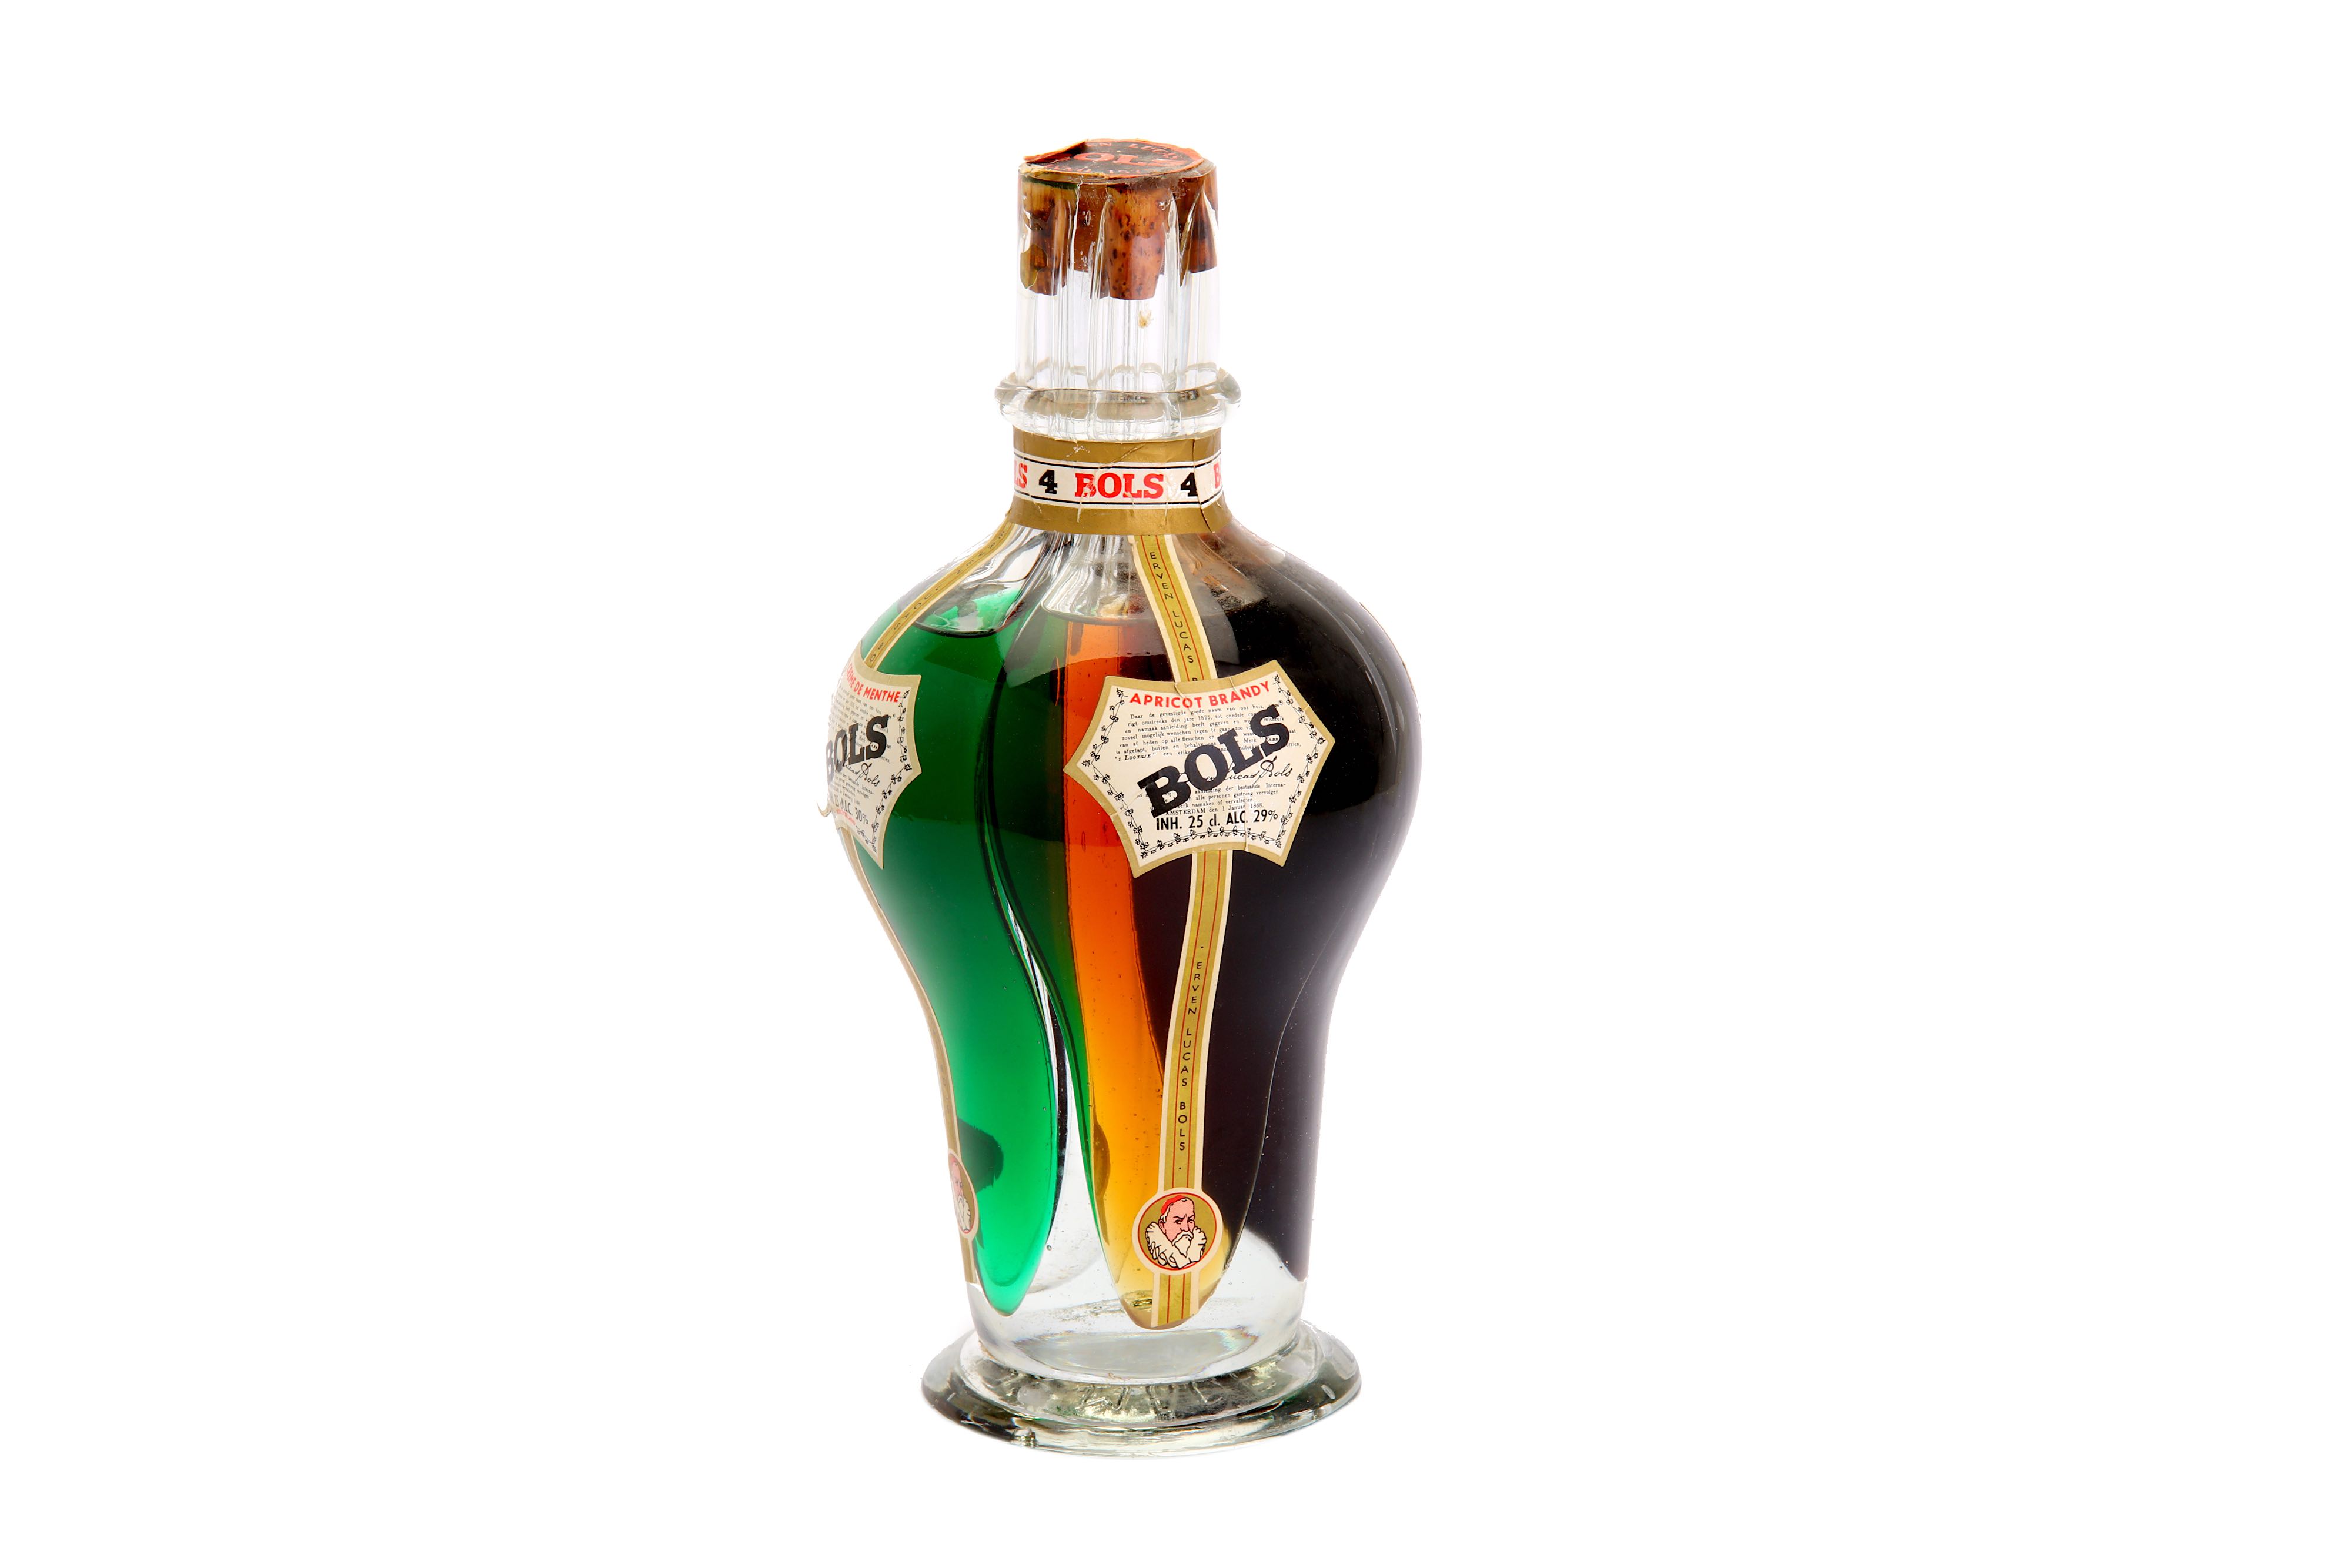 1 BOTTLE OF THE BOLS FOUR - FOUR LIQUEURS IN ONE - Image 3 of 4